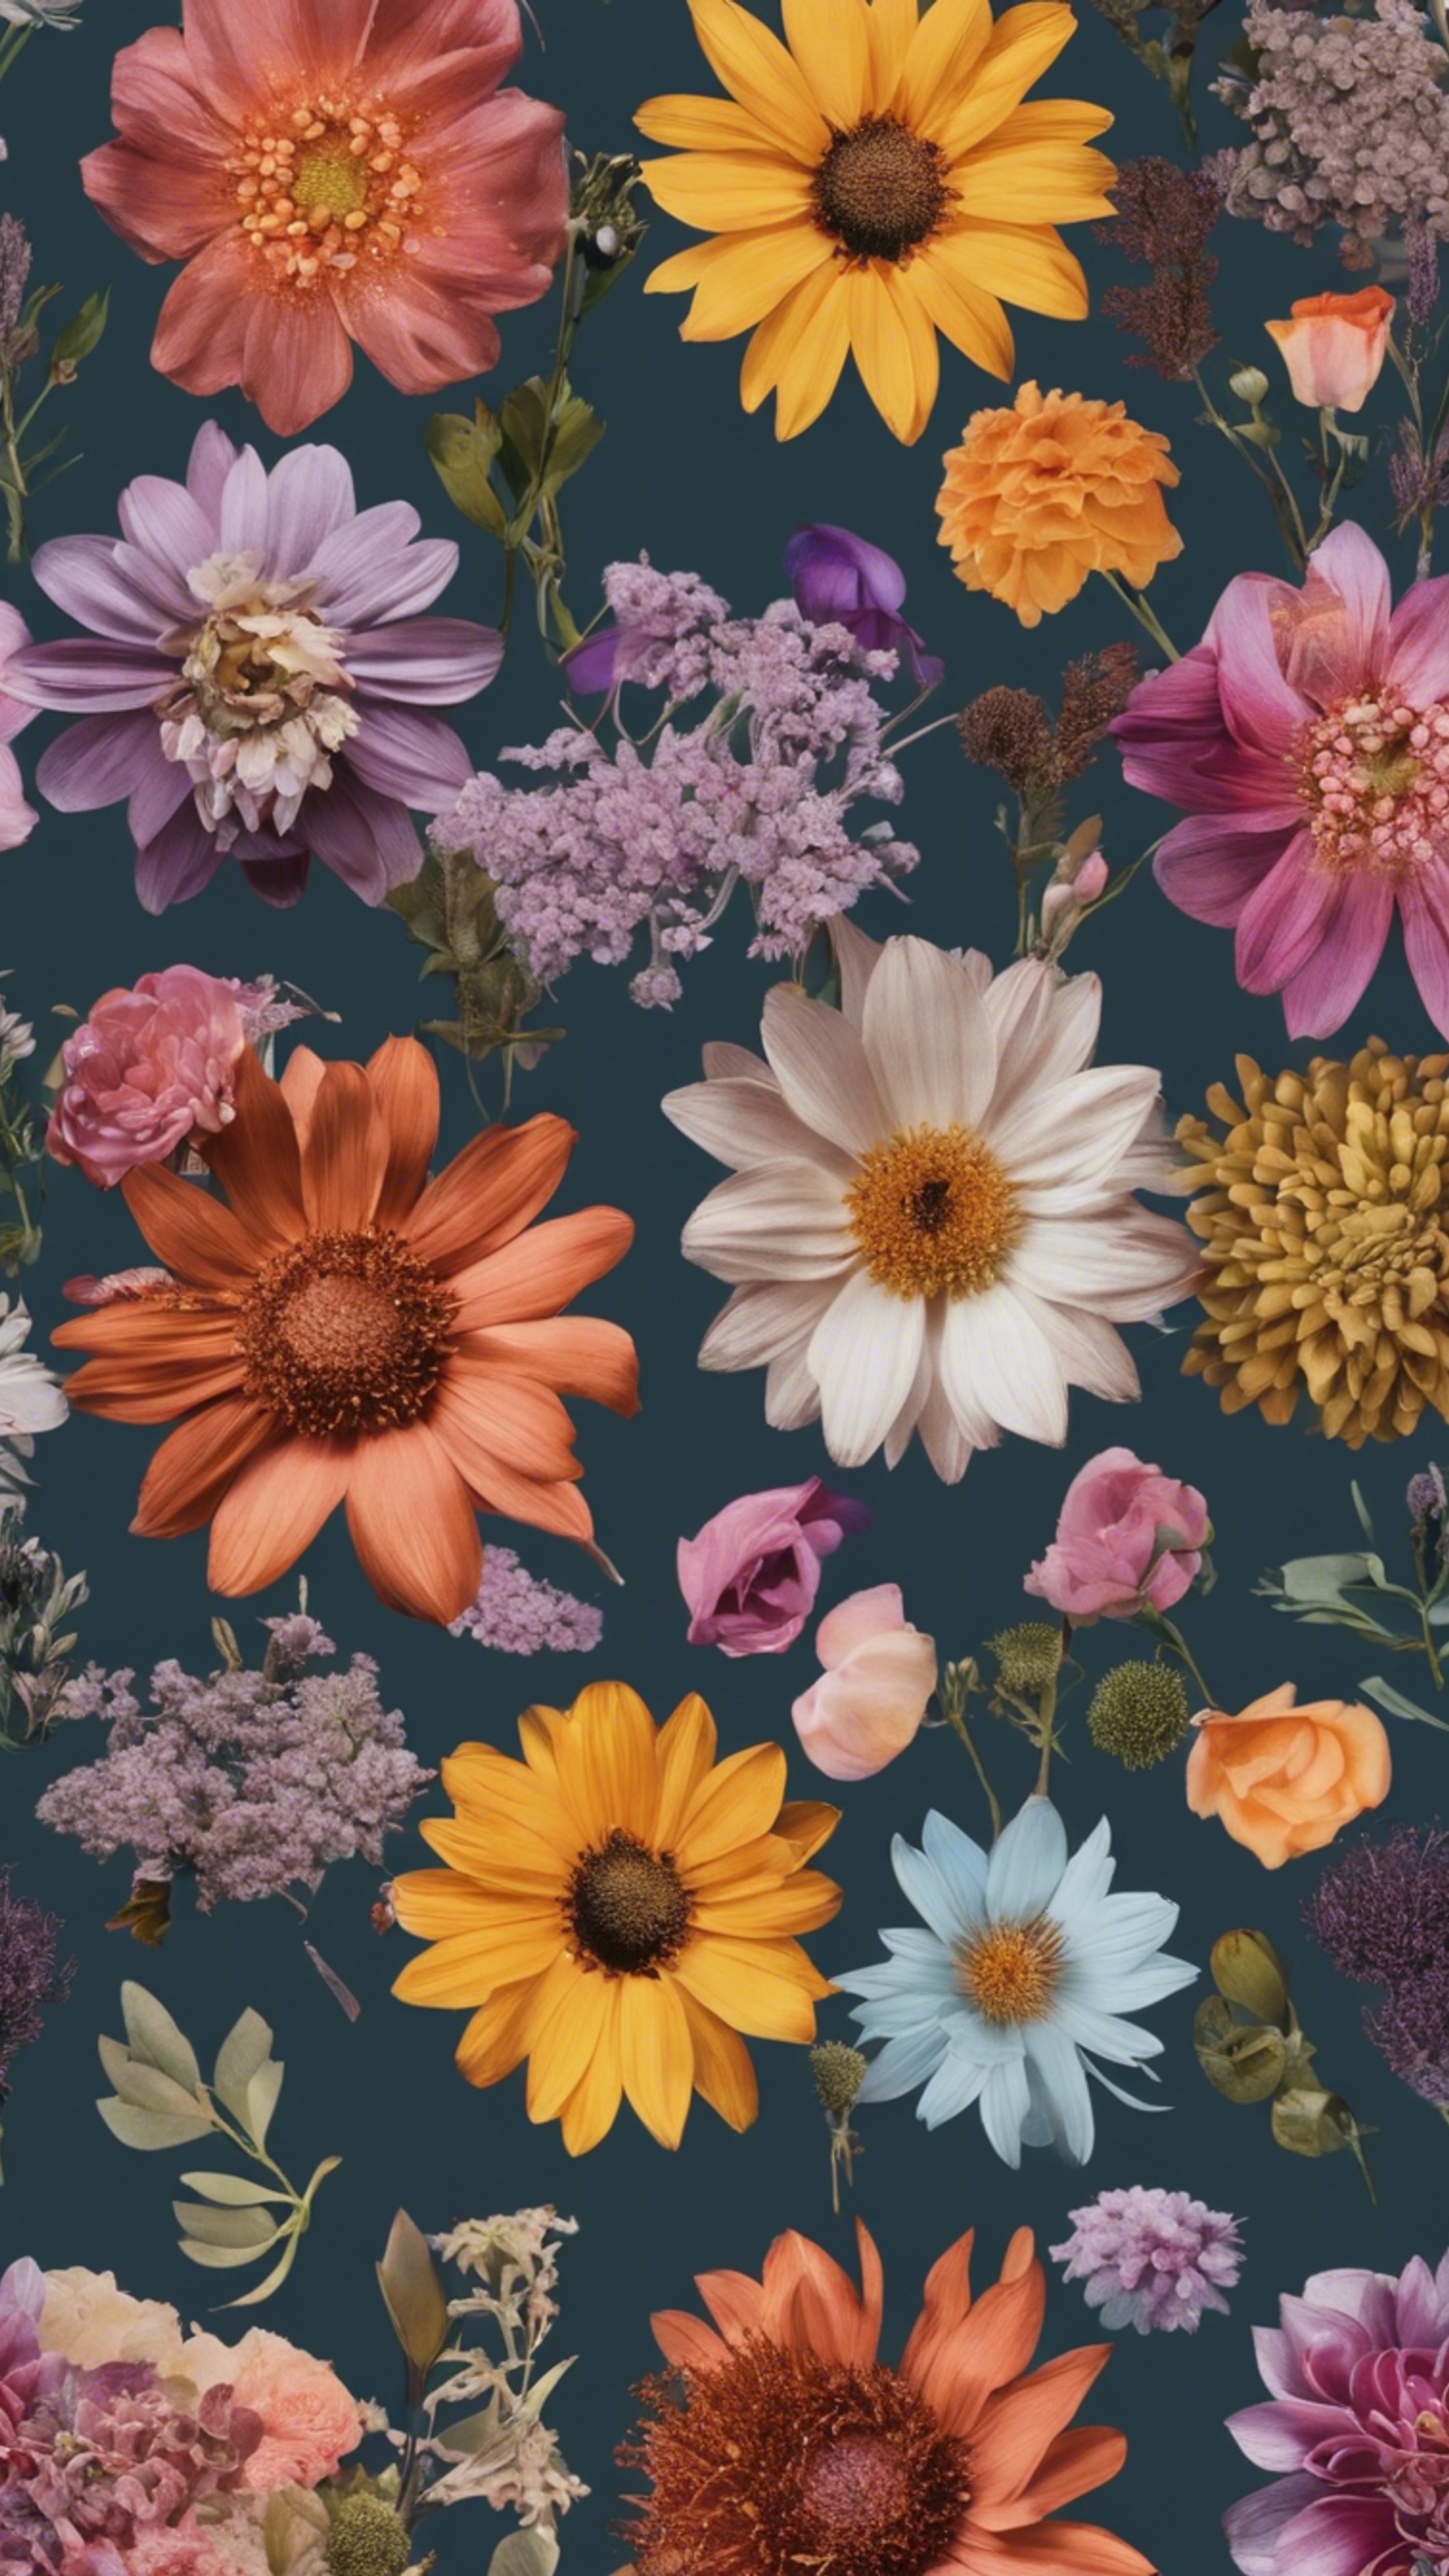 Multiple flowers of different types and colors, distinctively arranged in a bohemian floral design pattern. Tapeta[d475d4e8f3a0489d92d5]